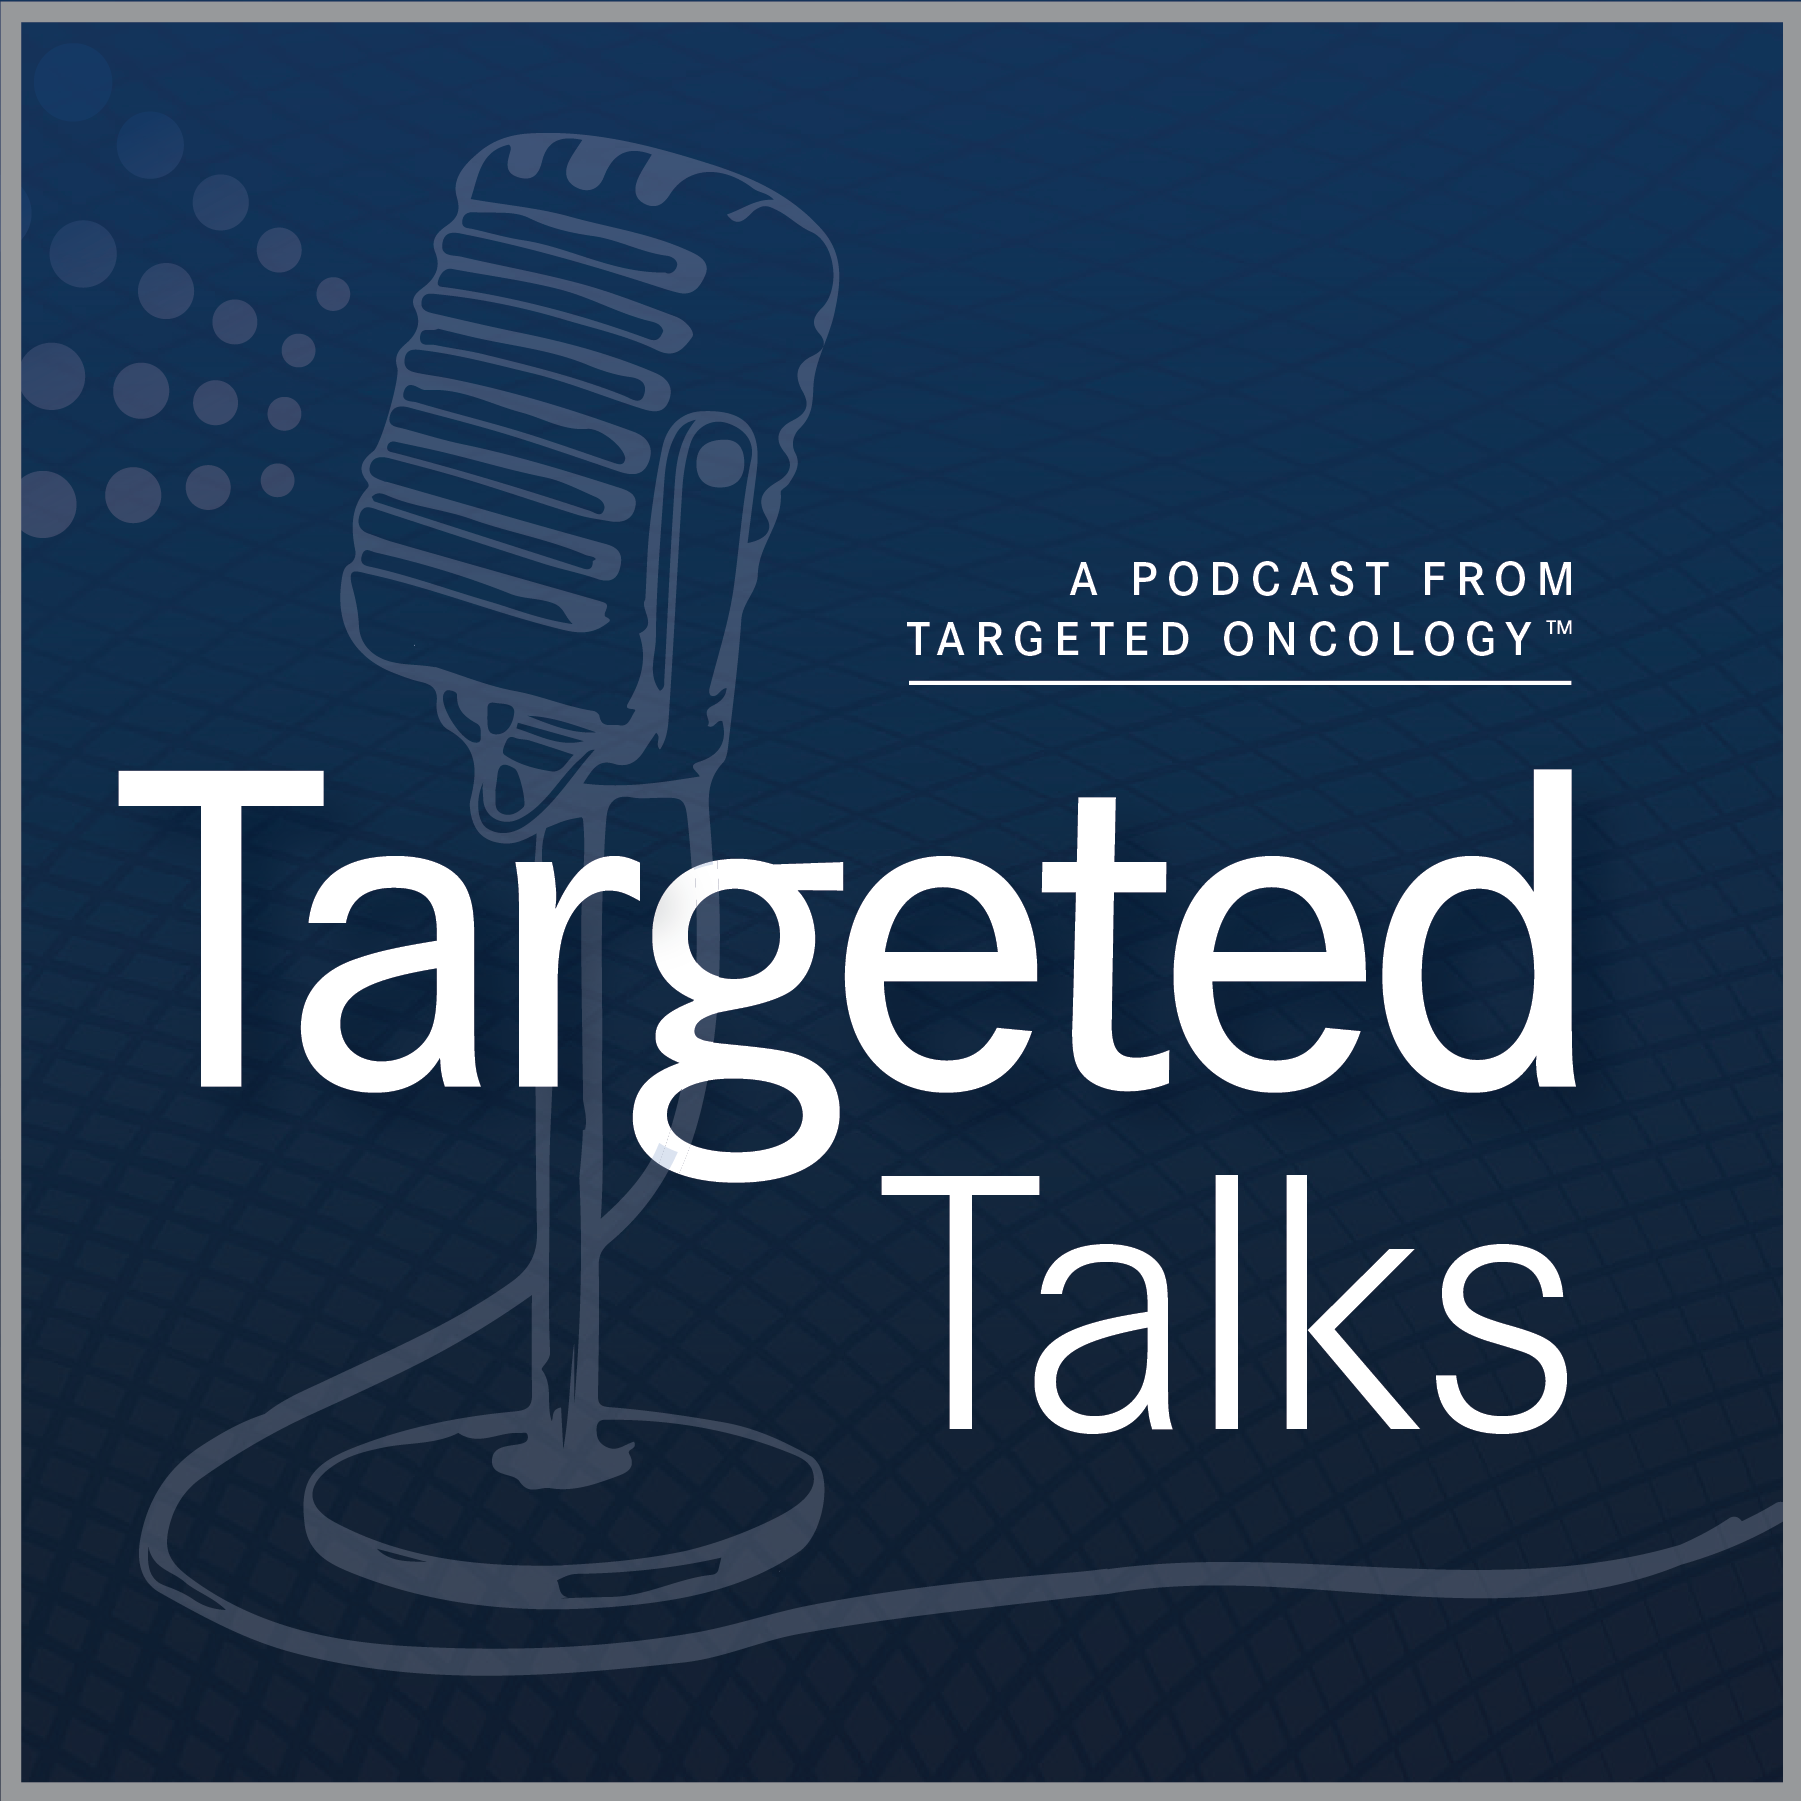 Targeted Oncology™ Launches “Targeted Talks” Podcast Series